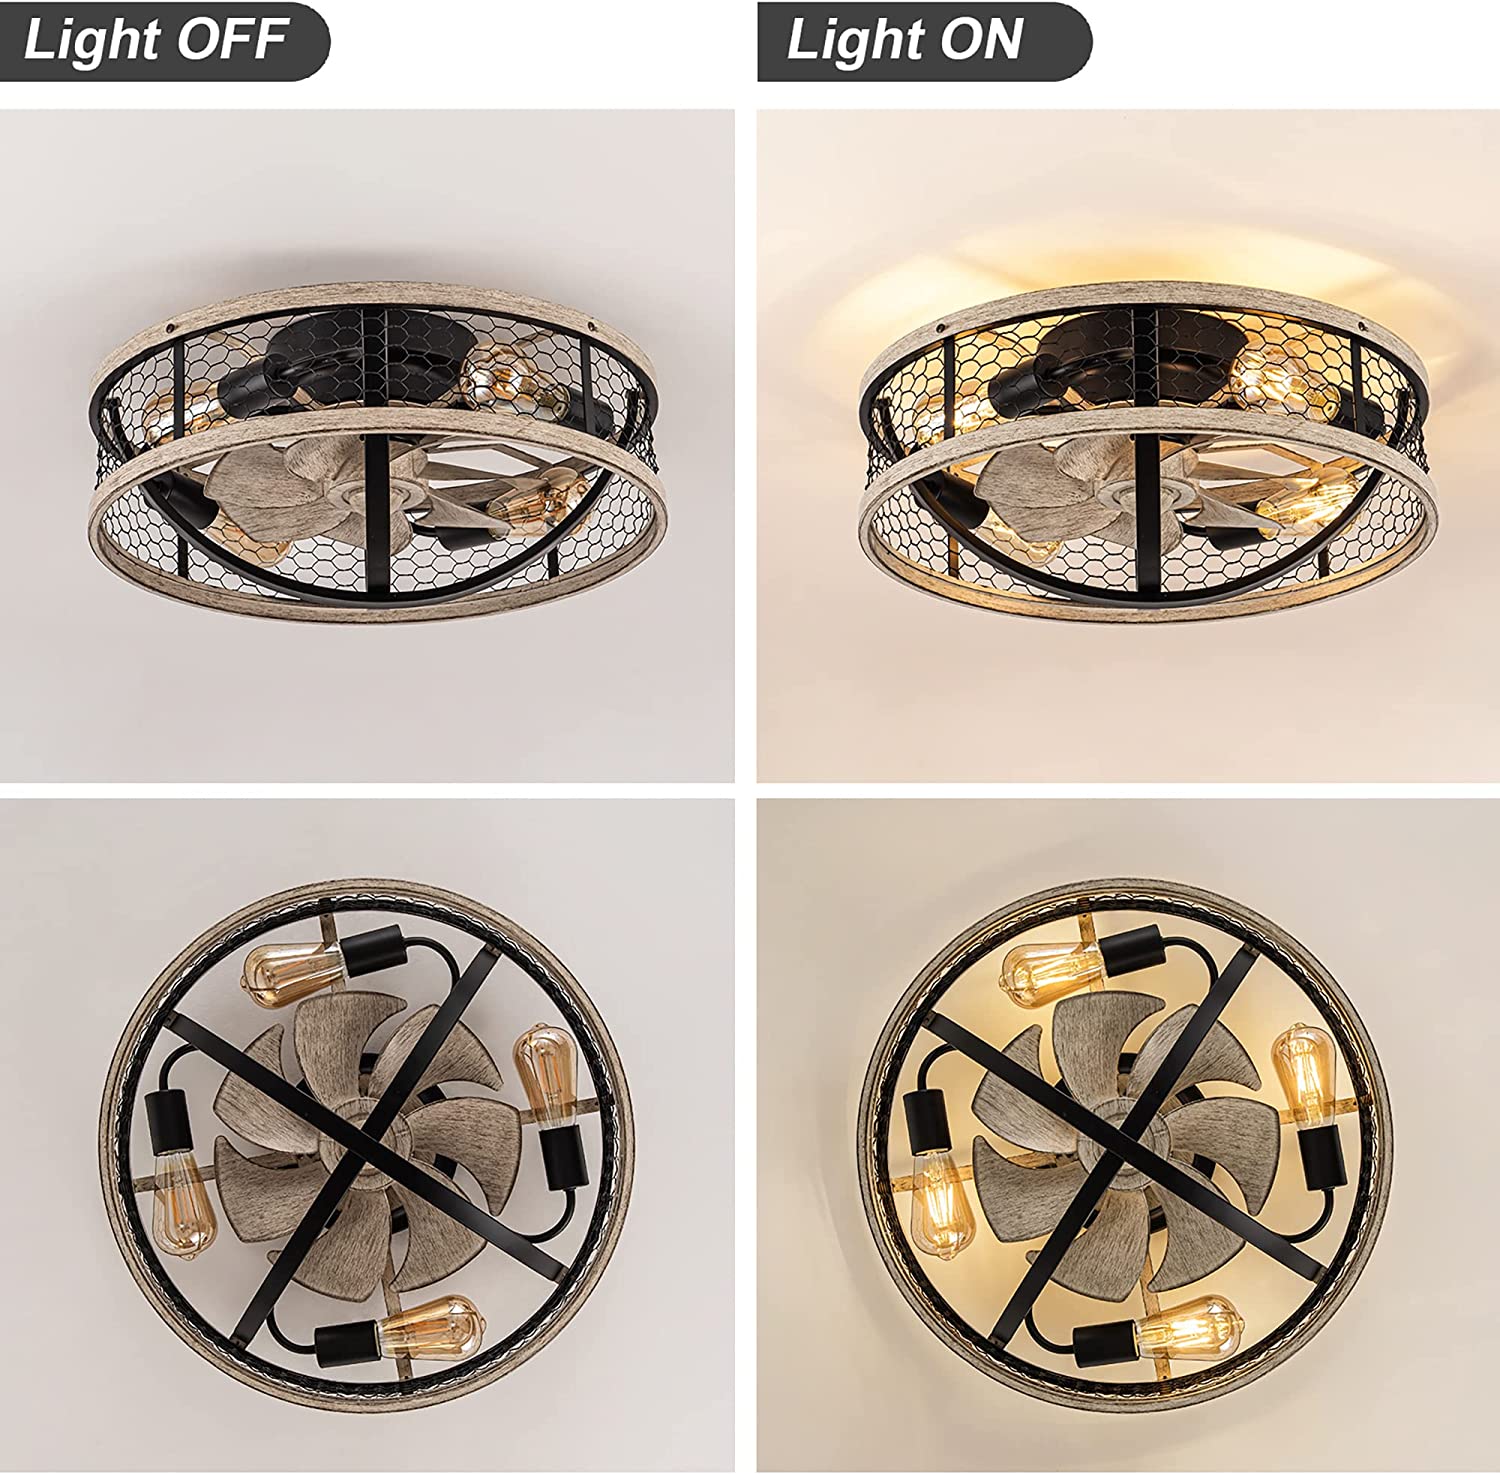 5 light industrial cage ceiling fan with light remote control farmhouse ceiling fan lamp with 3 speed